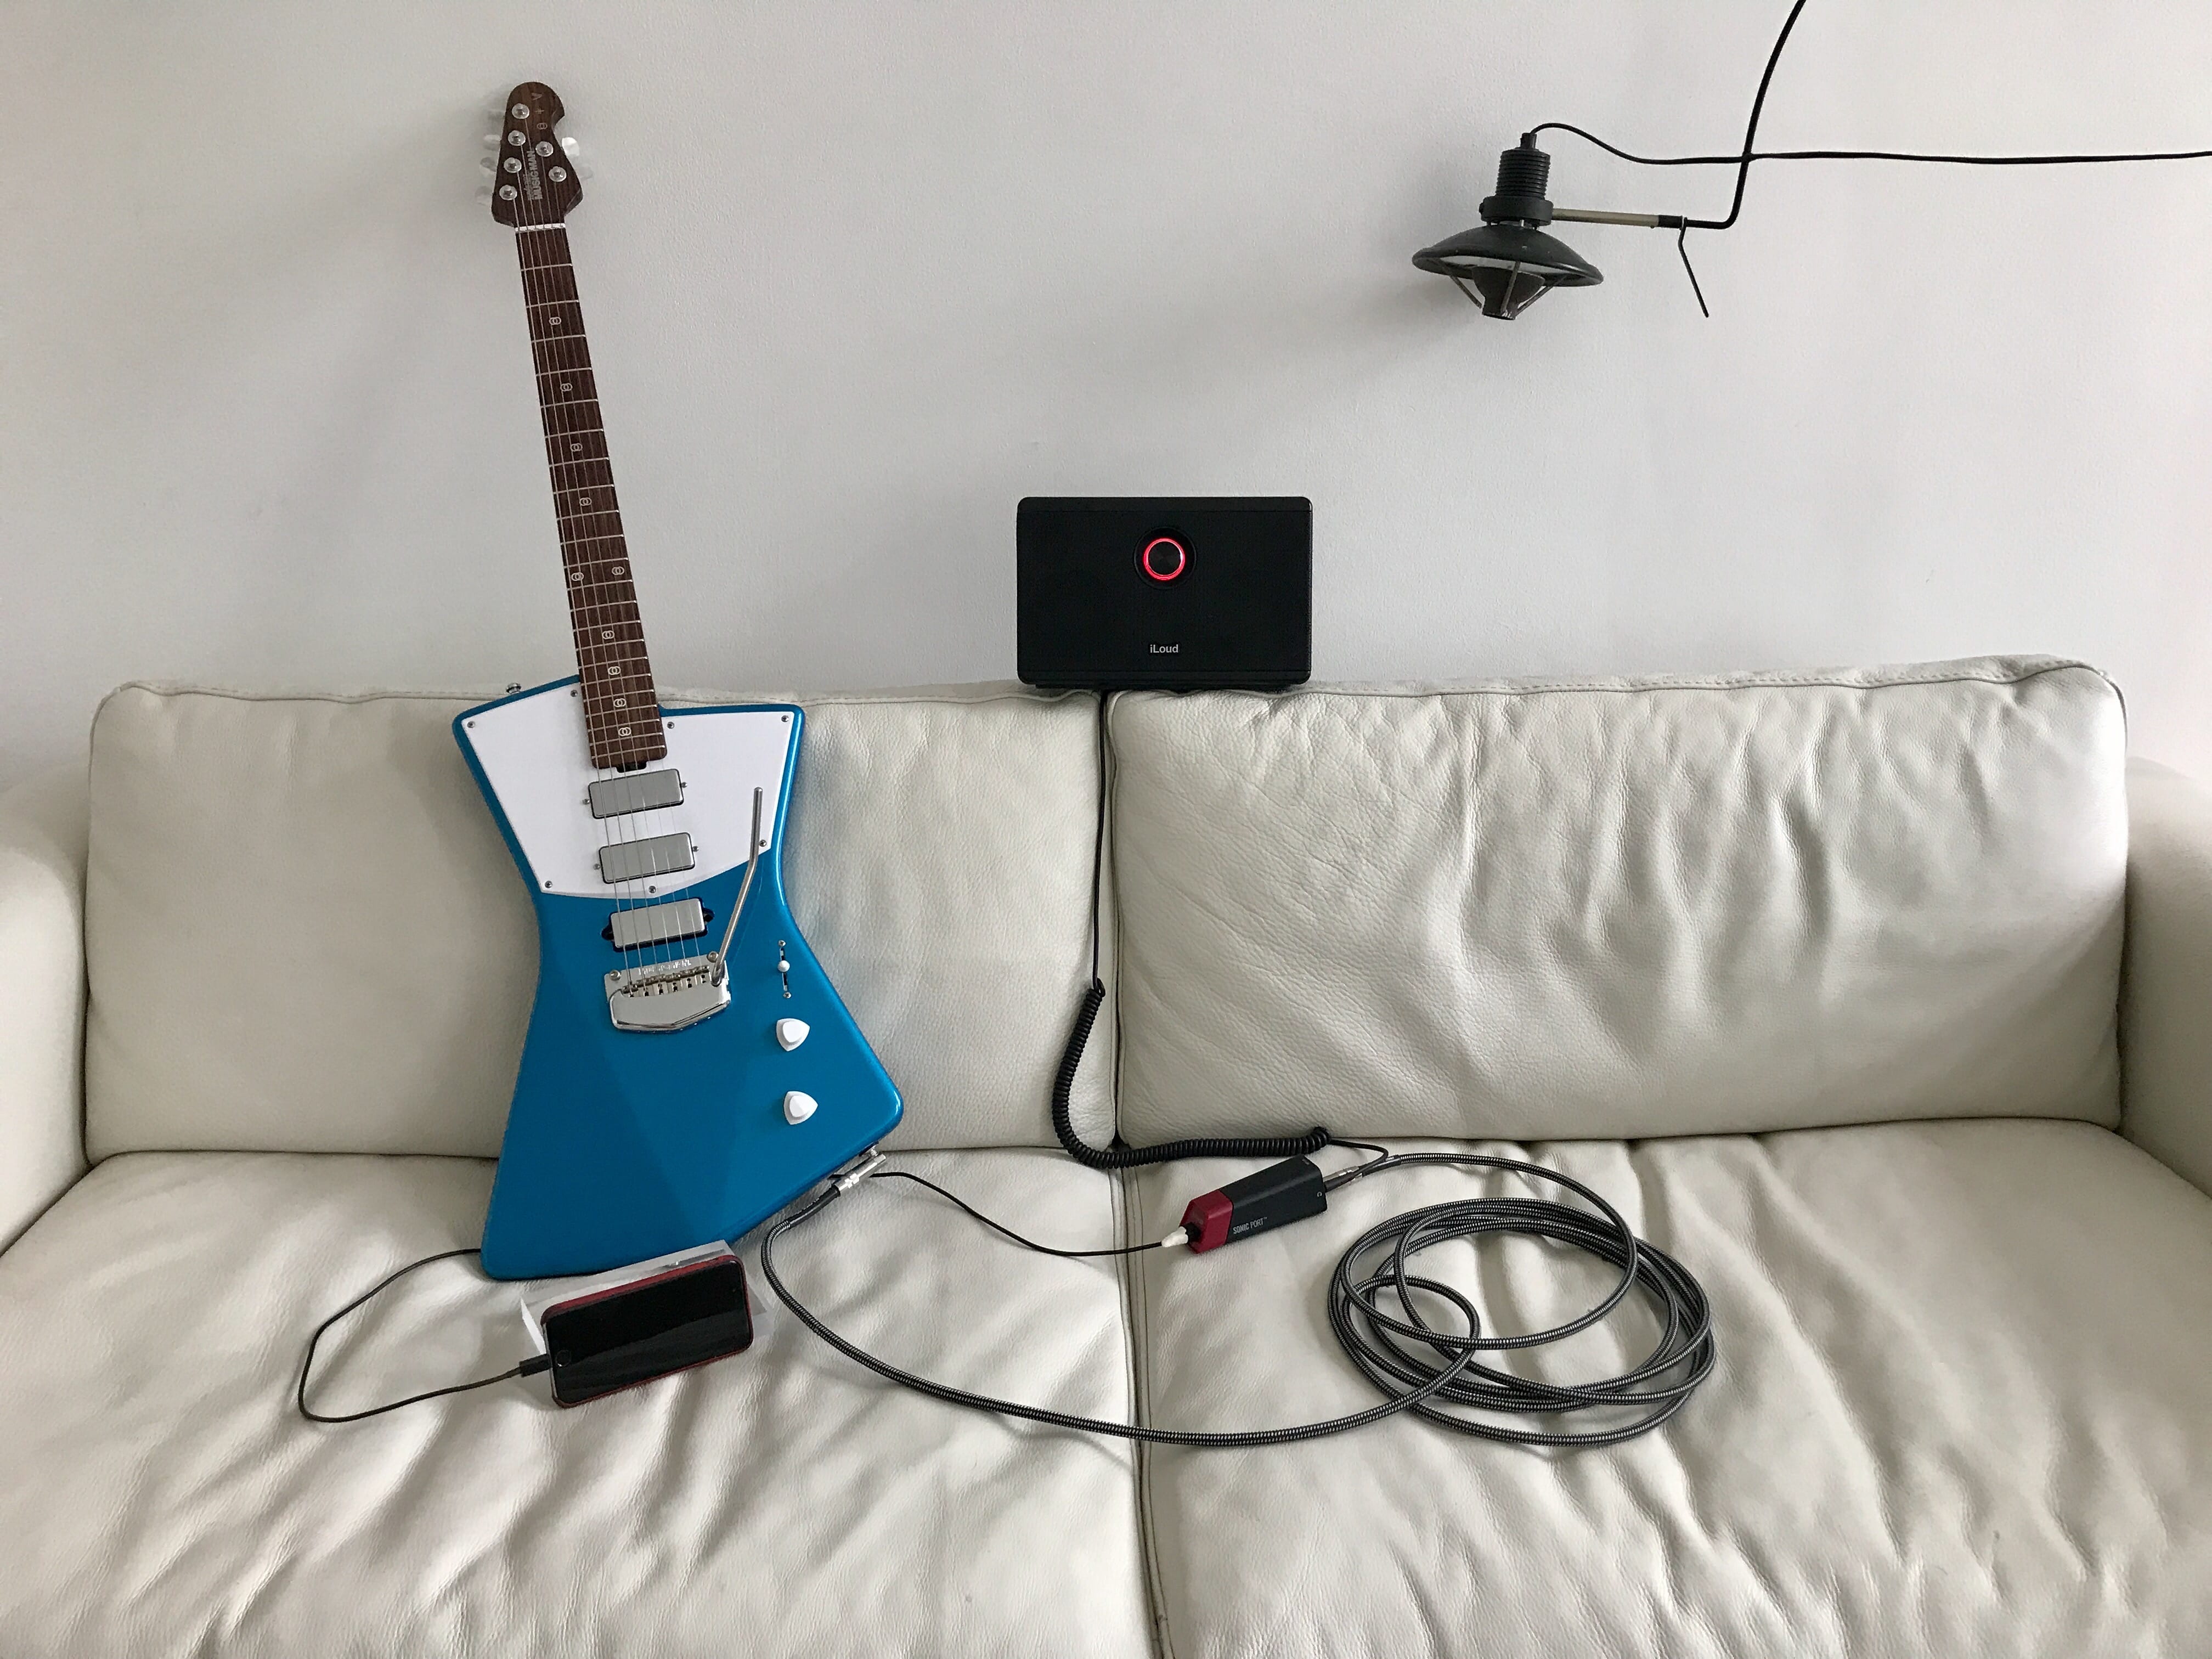 How to connect guitar to garageband macbook air